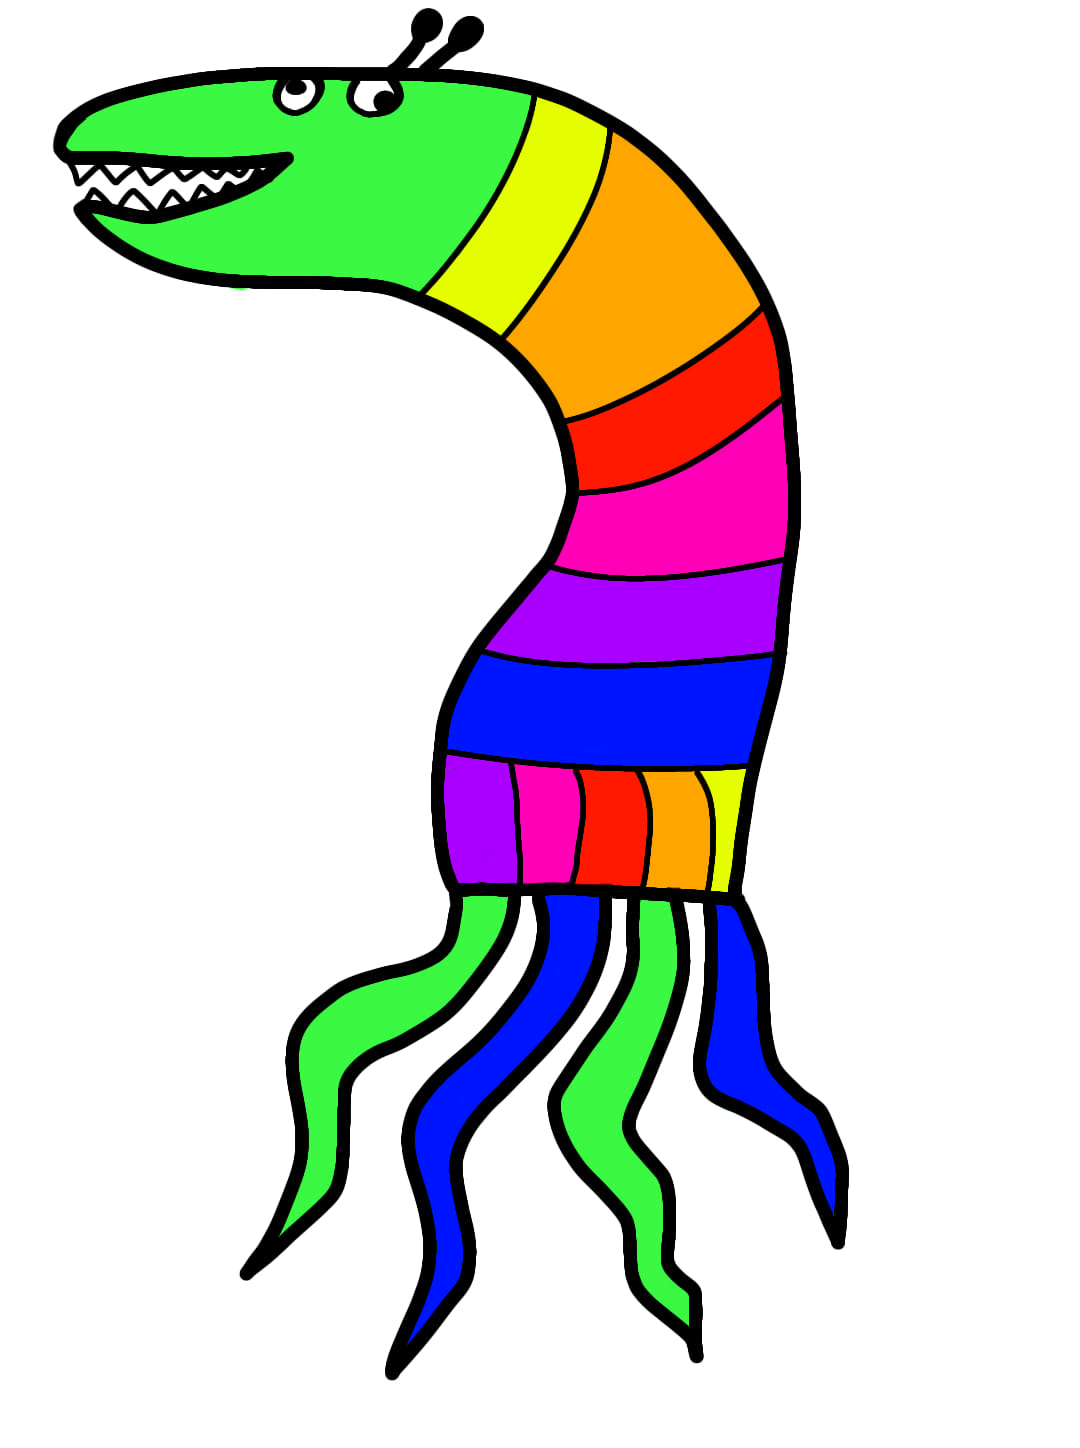 Drawing of a colourful sock monster